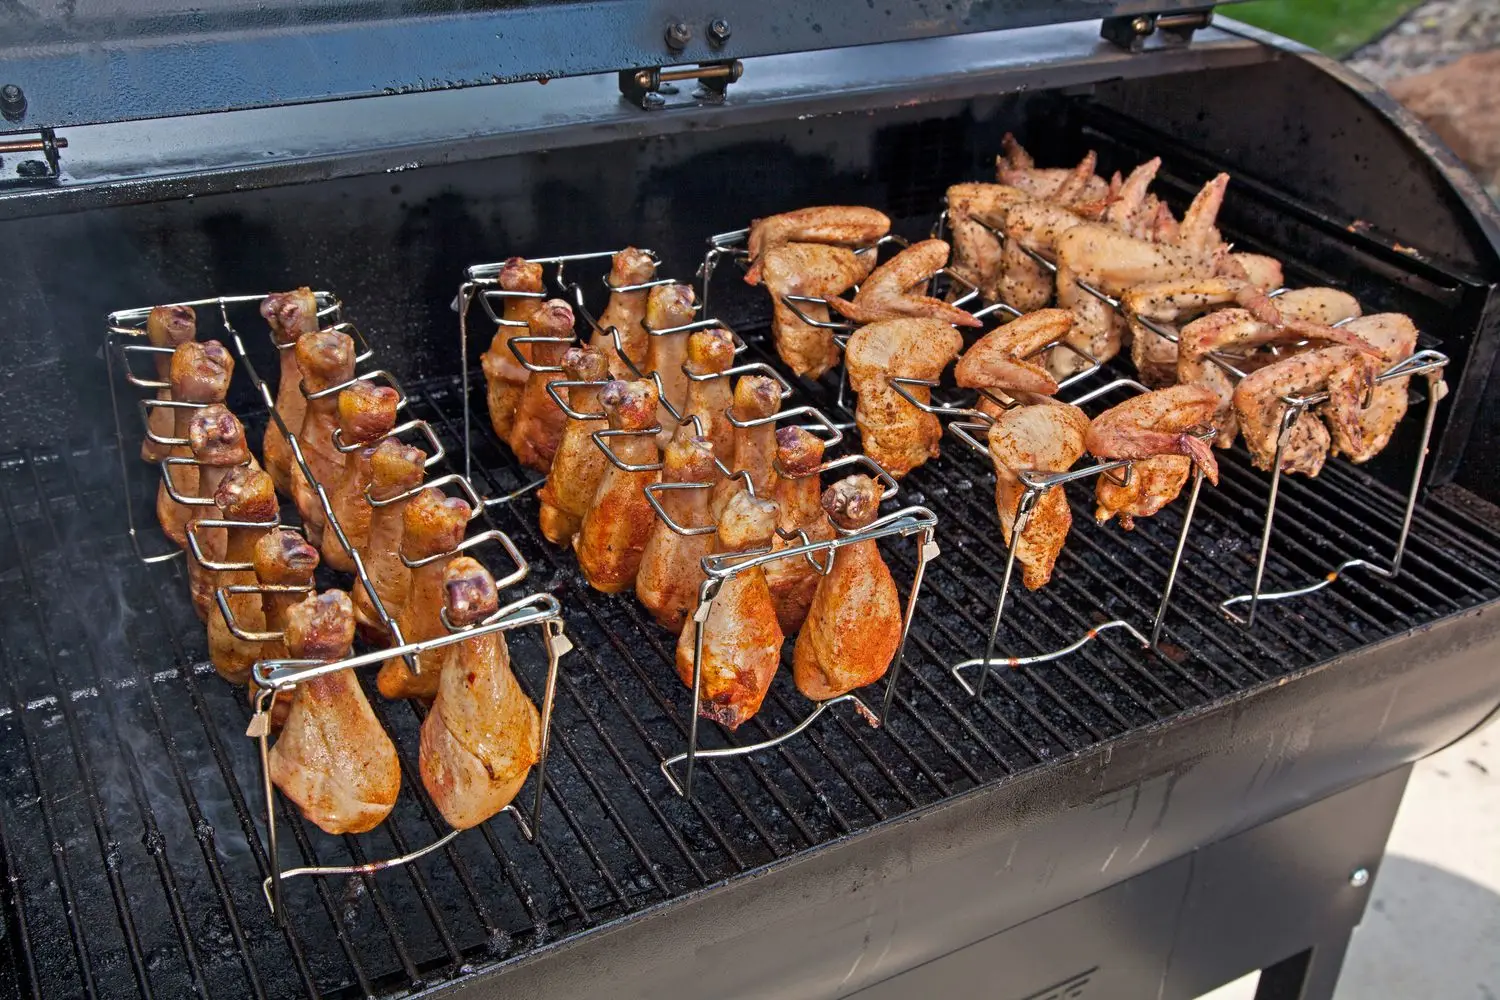 Hang Up to 12 Chicken Legs or Wings BBQ Chicken Drumsticks Rack Stainless Steel Roaster Stand with Drip Pan JIAOAOO Chicken Leg Wing Grill Rack Great Easy to Grill Smoke Wings in Grill or Smoker 